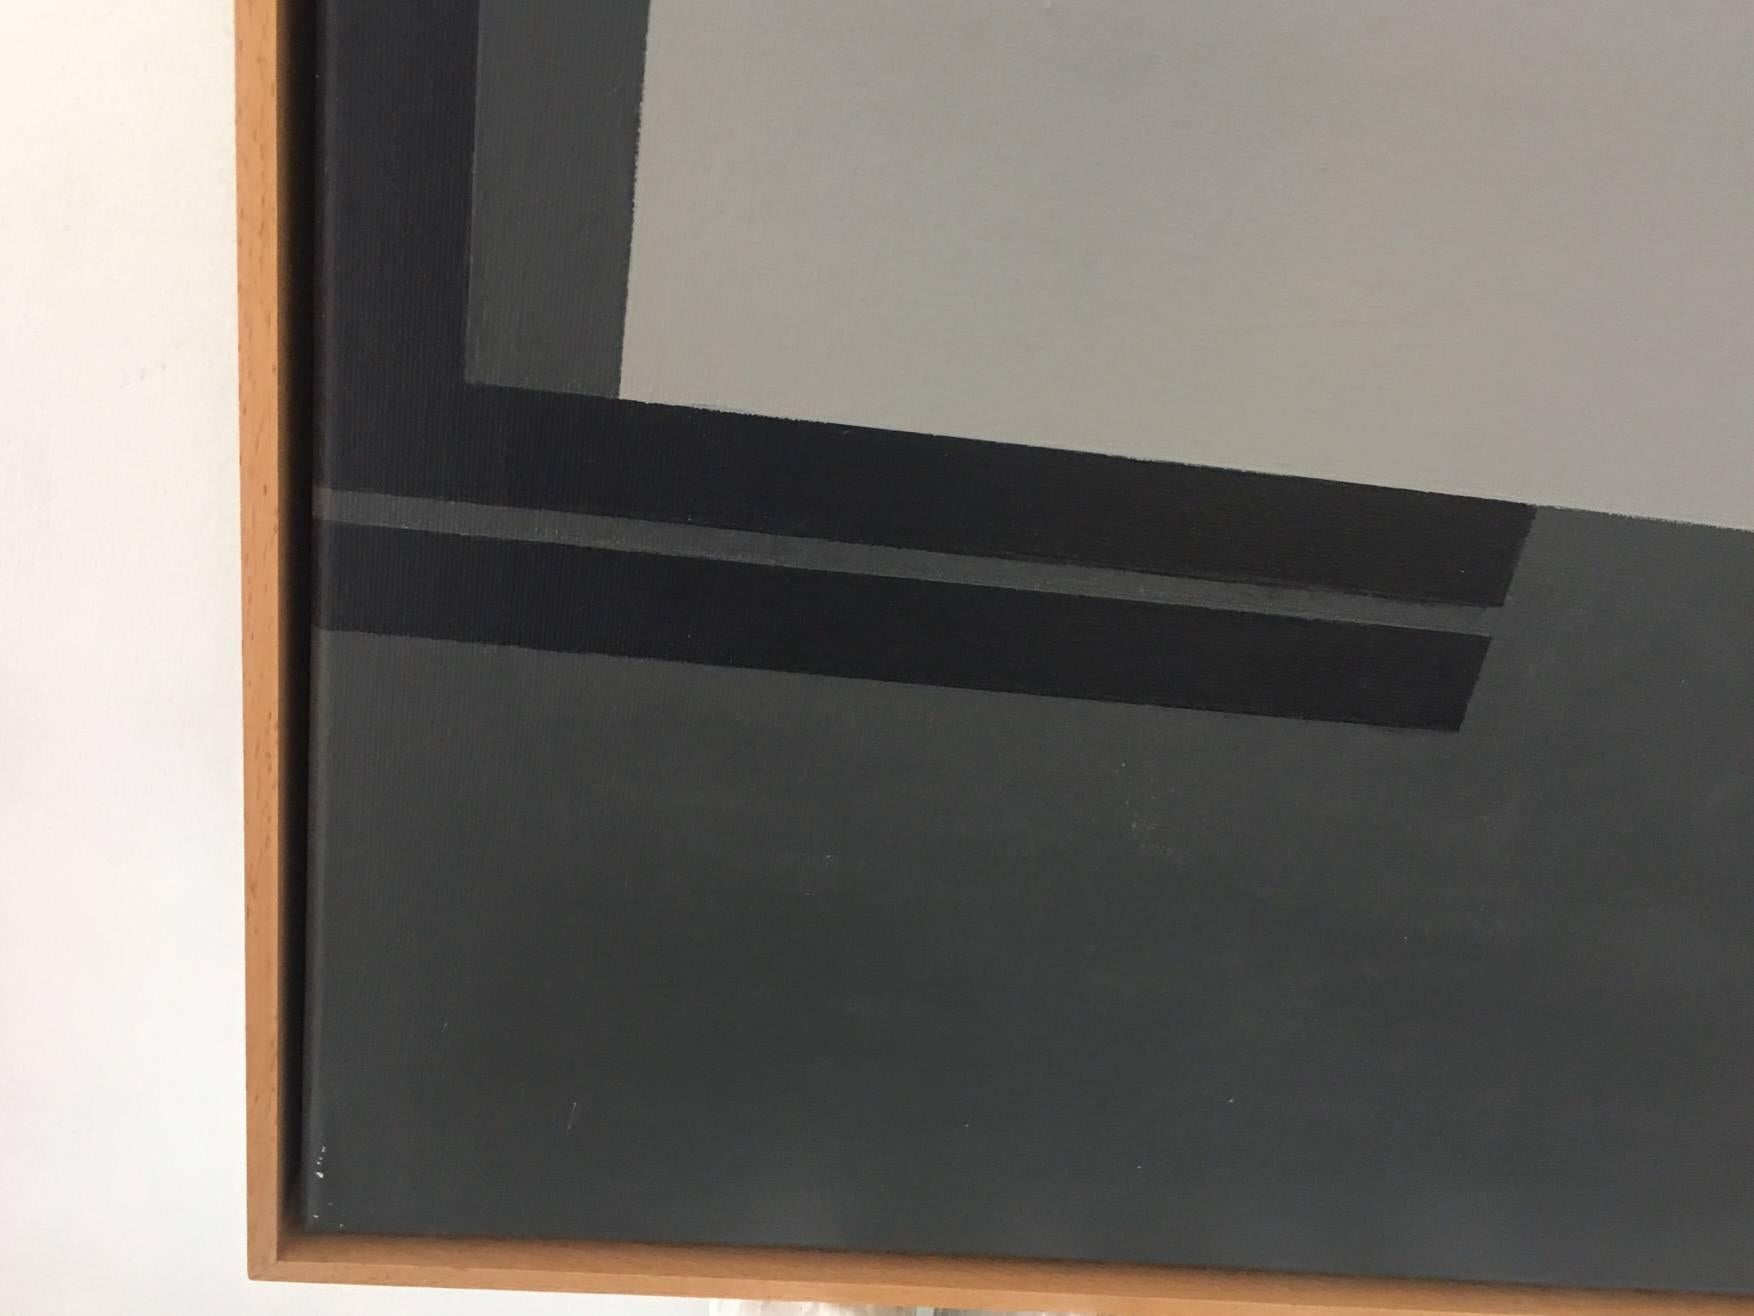 Oil on canvas. Signed by artist Fred Rubik, 1980. Museum frame.